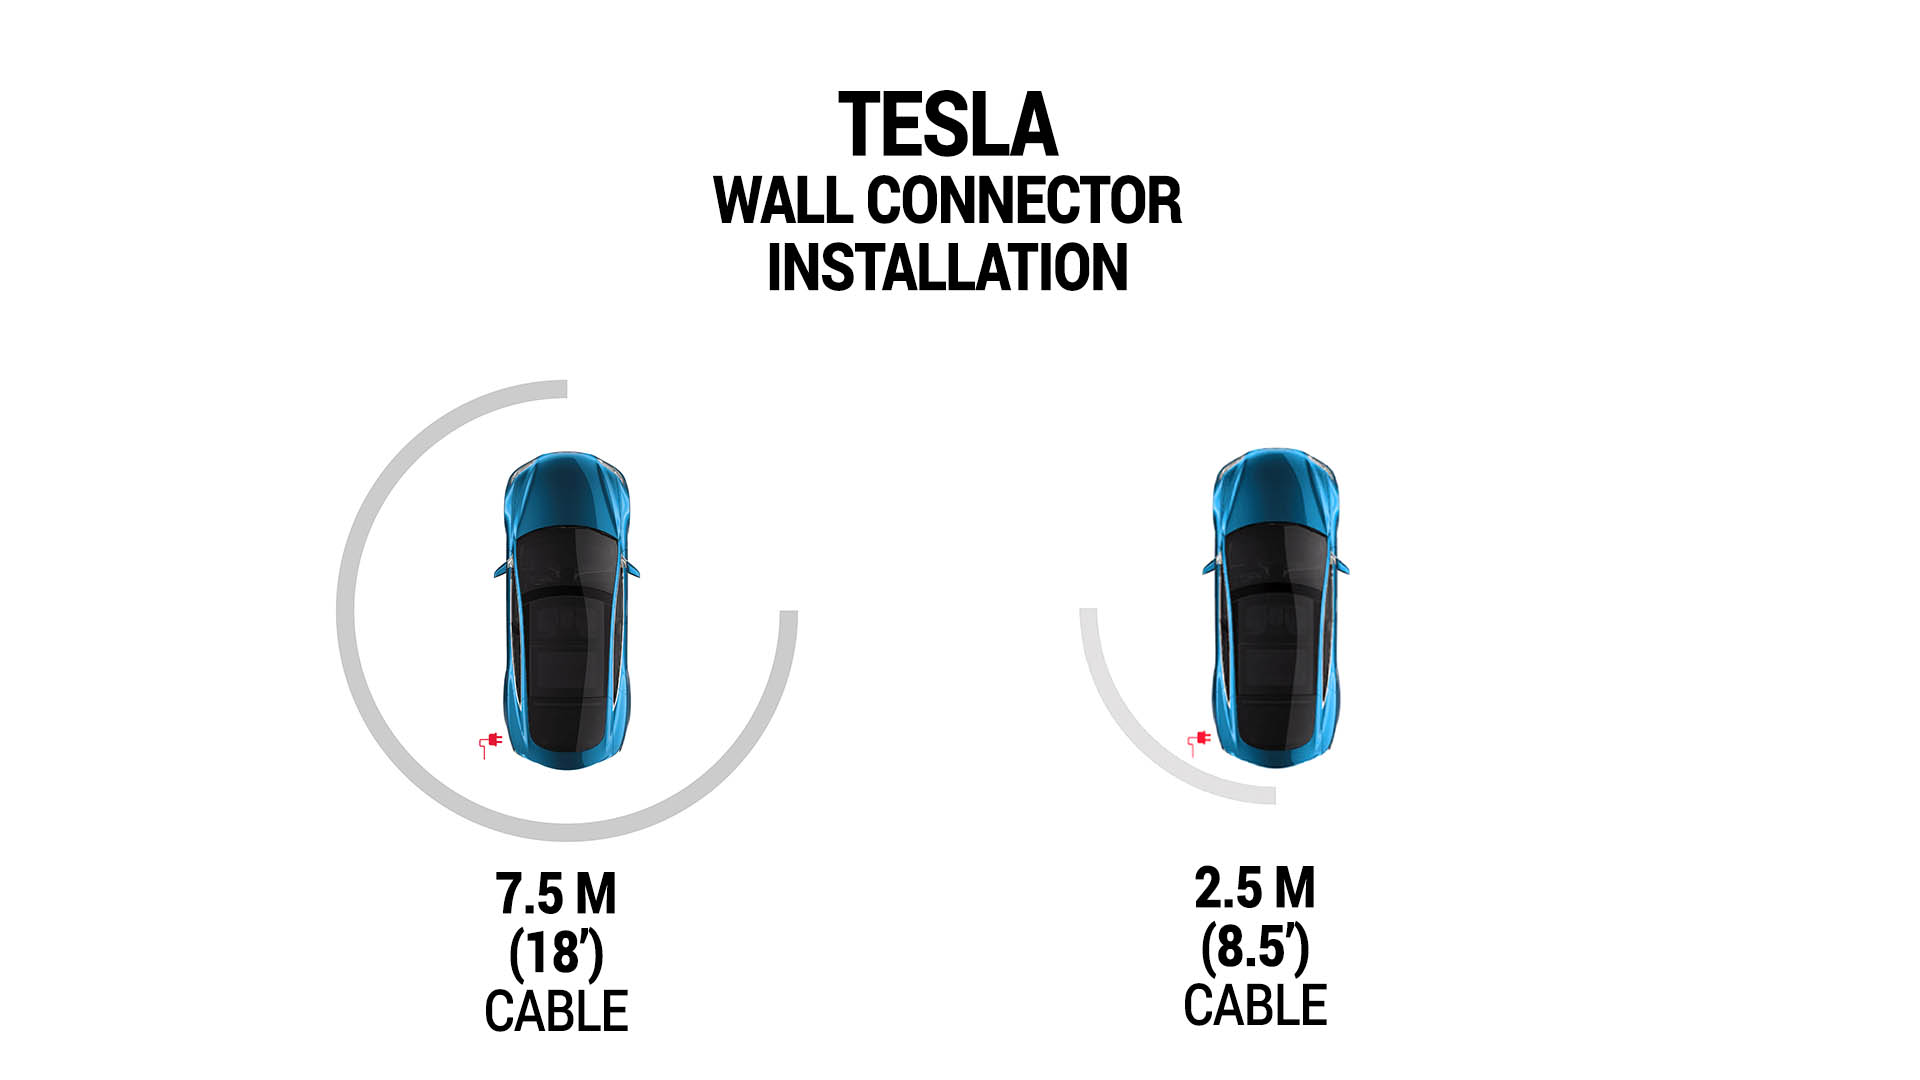 How to Install Tesla Wall Connector Gen 3 - Step By Step Guide